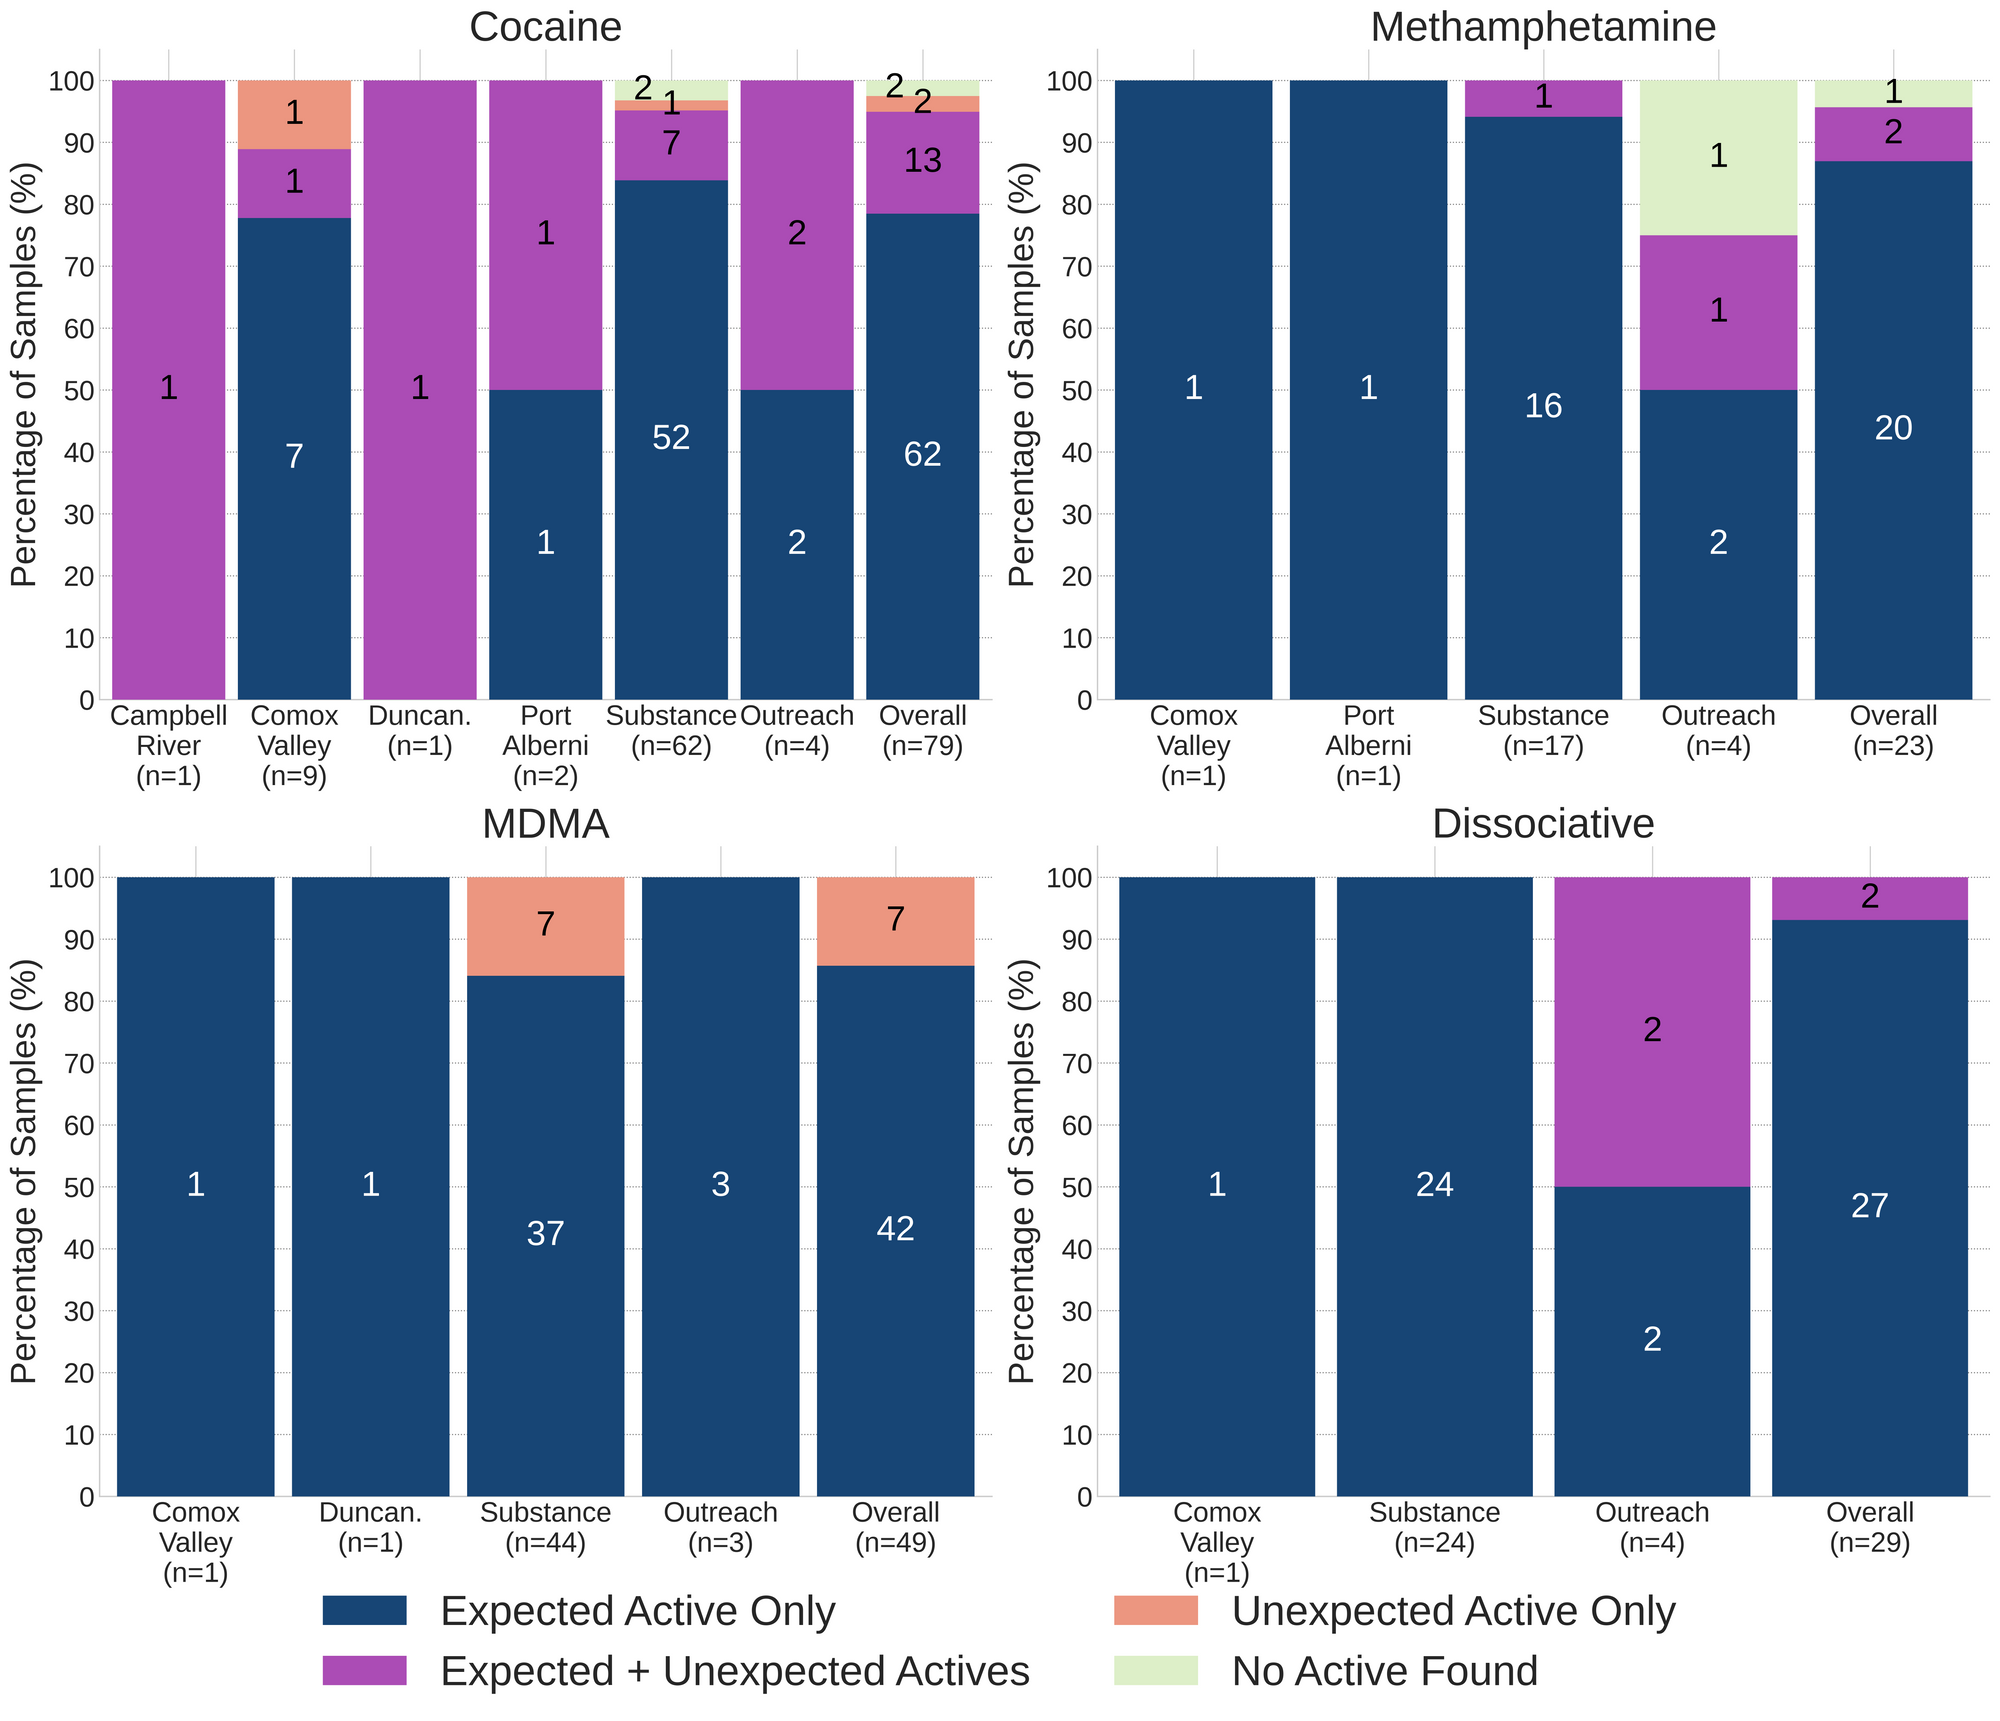 Figure 2. Adulteration breakdown by drug class and sample collection location/method. Bars are stacked by percentage of samples in each category, with the individual sample counts overlaid. Dark Blue regions group samples that were simply as expected with no other notable compounds detected, Magenta shows samples that contained the expected drug and were contaminated with an unexpected active, Salmon groups samples that only contained an unexpected active (the expected drug was not found), and Lime displays samples where no active compounds were detected.